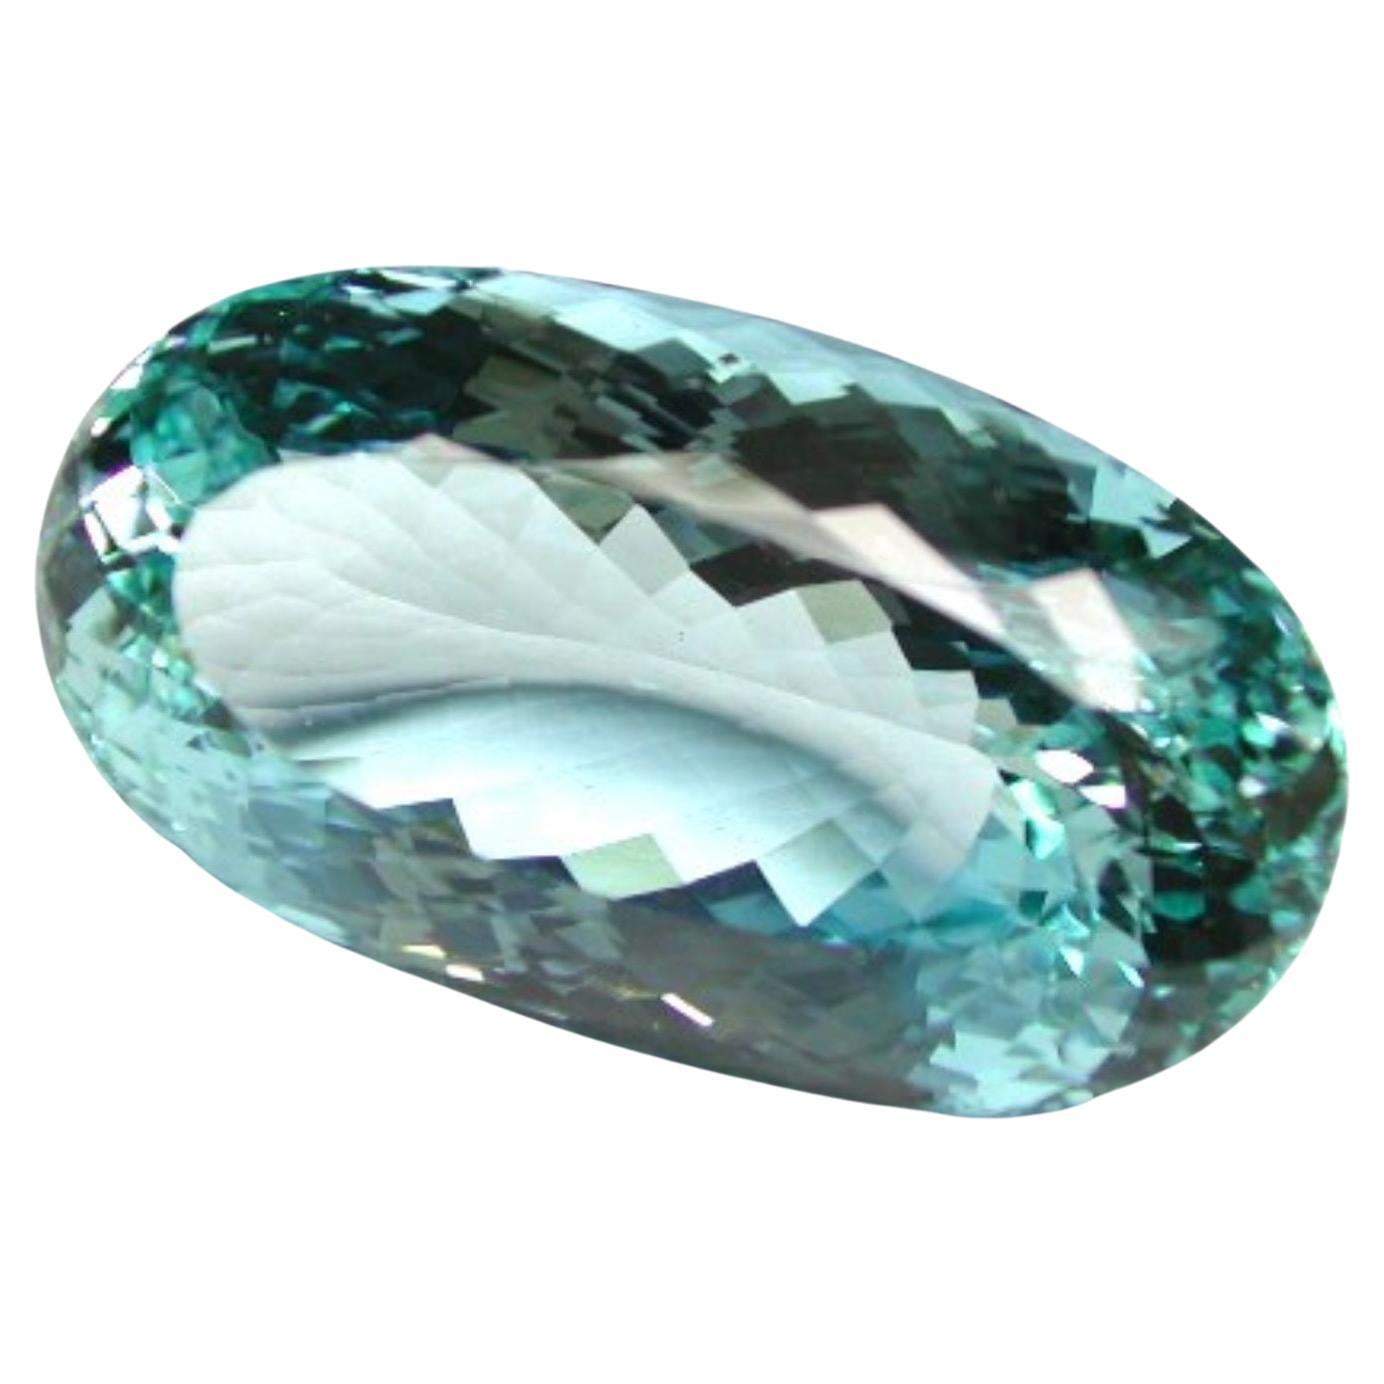 Collaborate with us to turn this beautiful gemstone into an extraordinary, one-of-a-kind work of art.
An important  aquamarine weighing 120.50 carats, oval cut, from Brazil  Padre Paraiso - Minas Gerais
We suggest you to make a pendant out of this